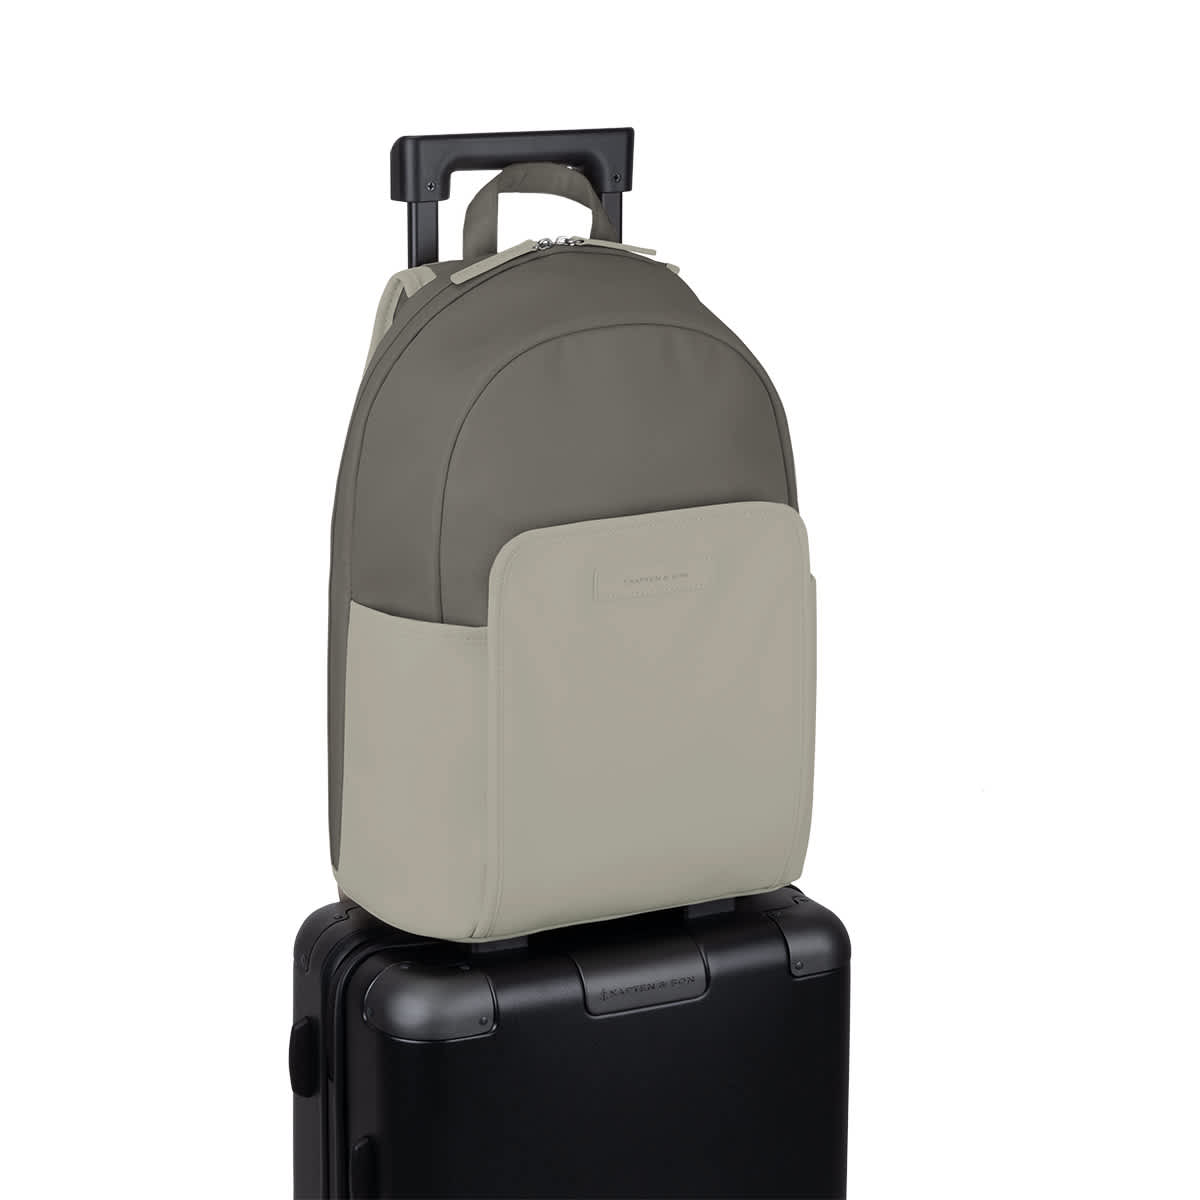 Aalborg Muted Mocha Backpack, Kapten and Son